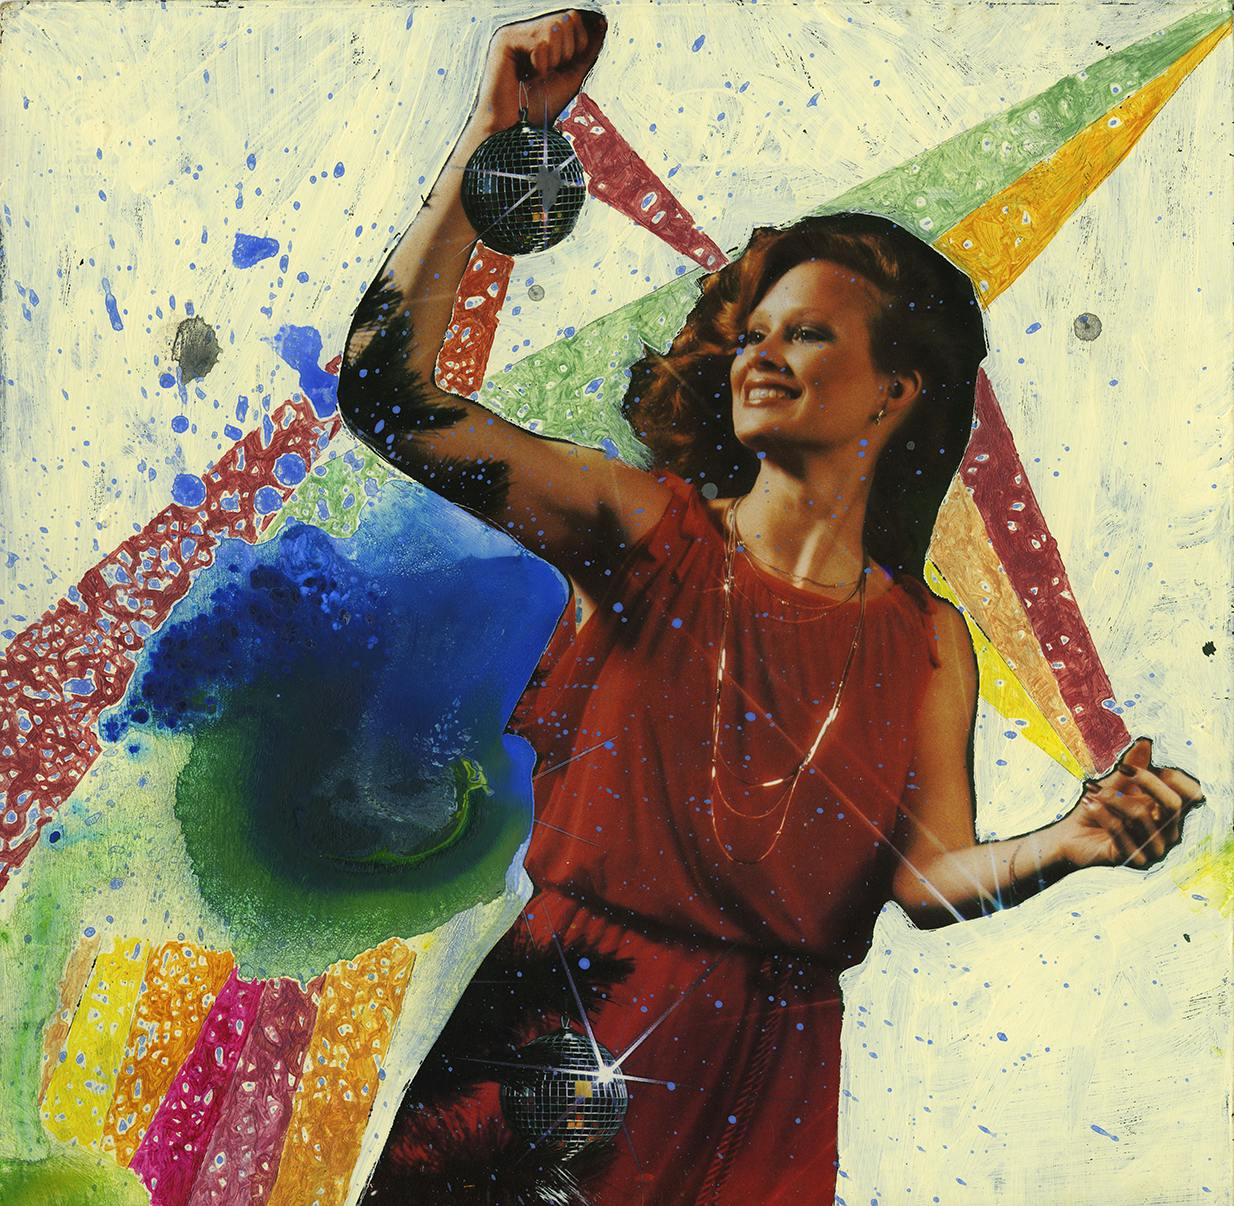 Image of one of Solei's colorful works. A woman in red holds up a small disco ball, and the background is splattered and diluted paint in the form of puddles, lines, and specks against a cream-over-blue layer.